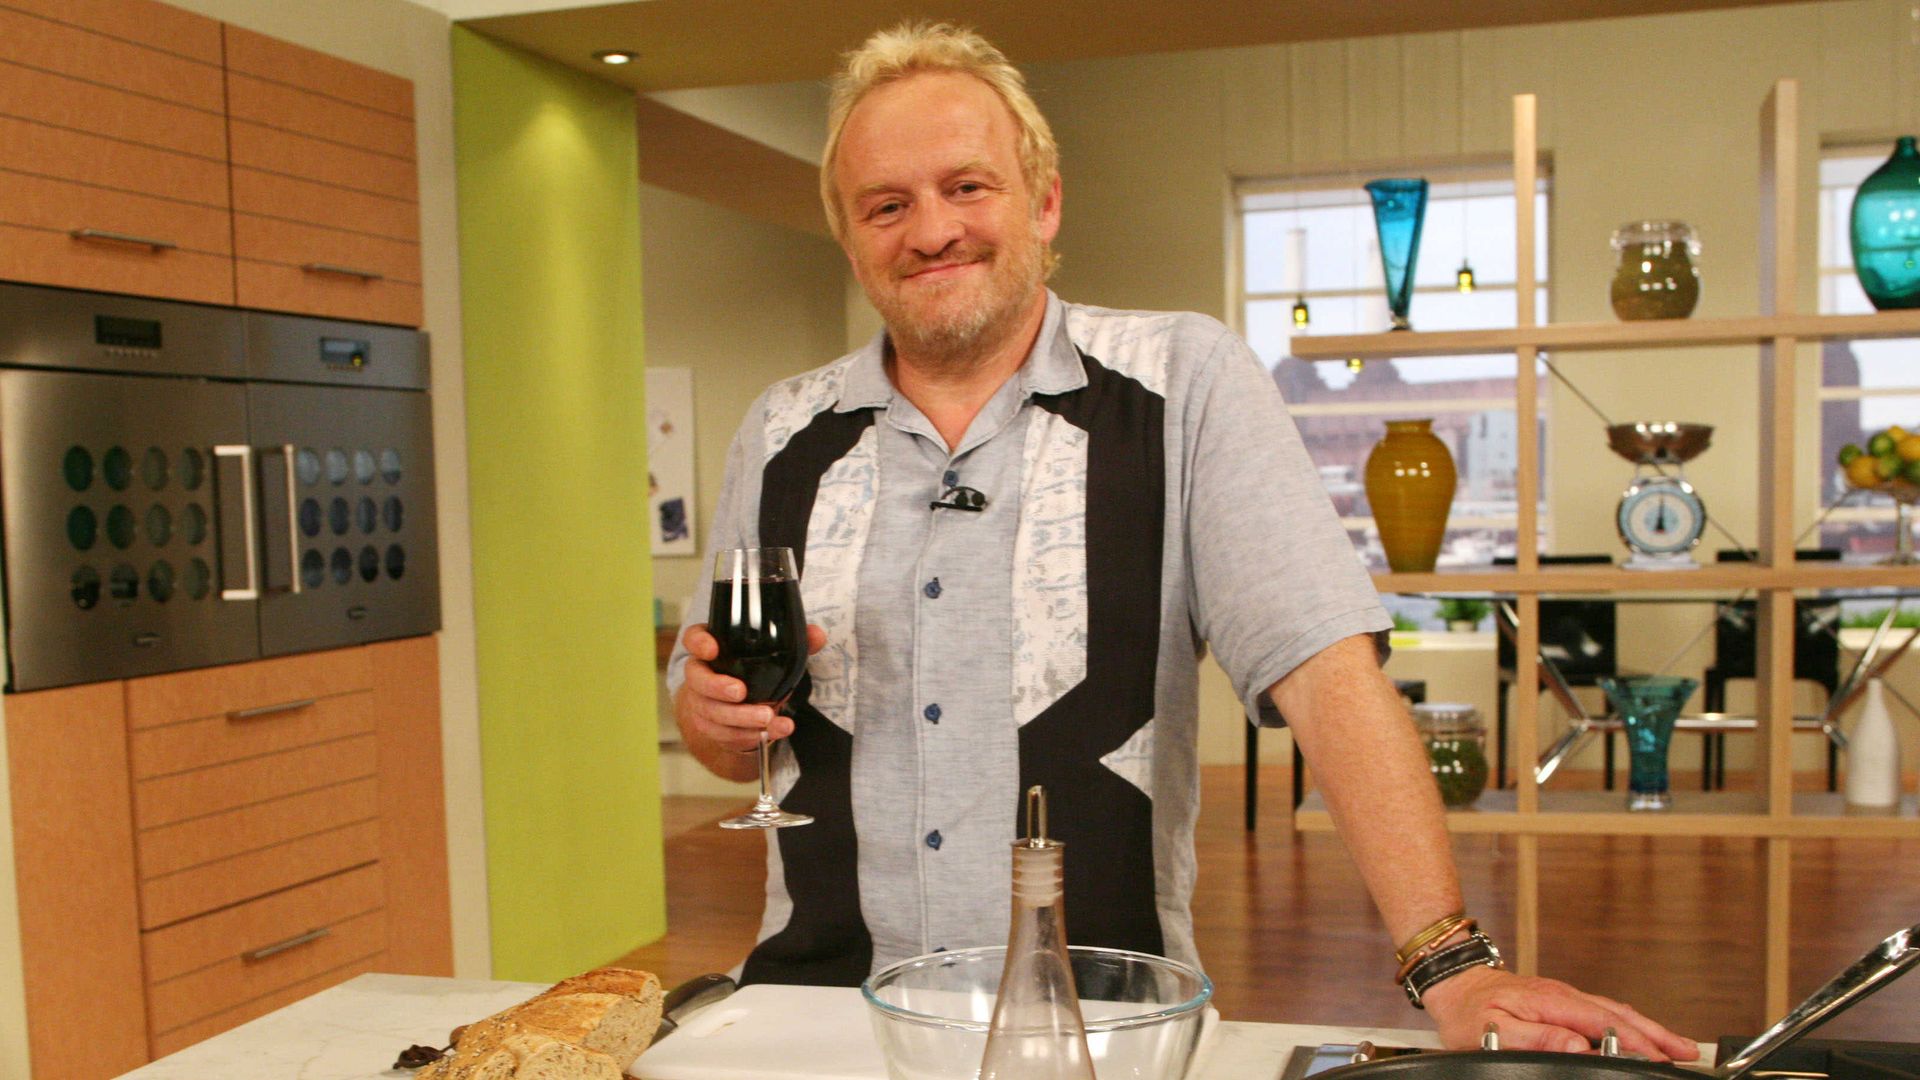 Antony Worrall Thompson on the Saturday Kitchen behind a kitchen counter holding a glass of red wine